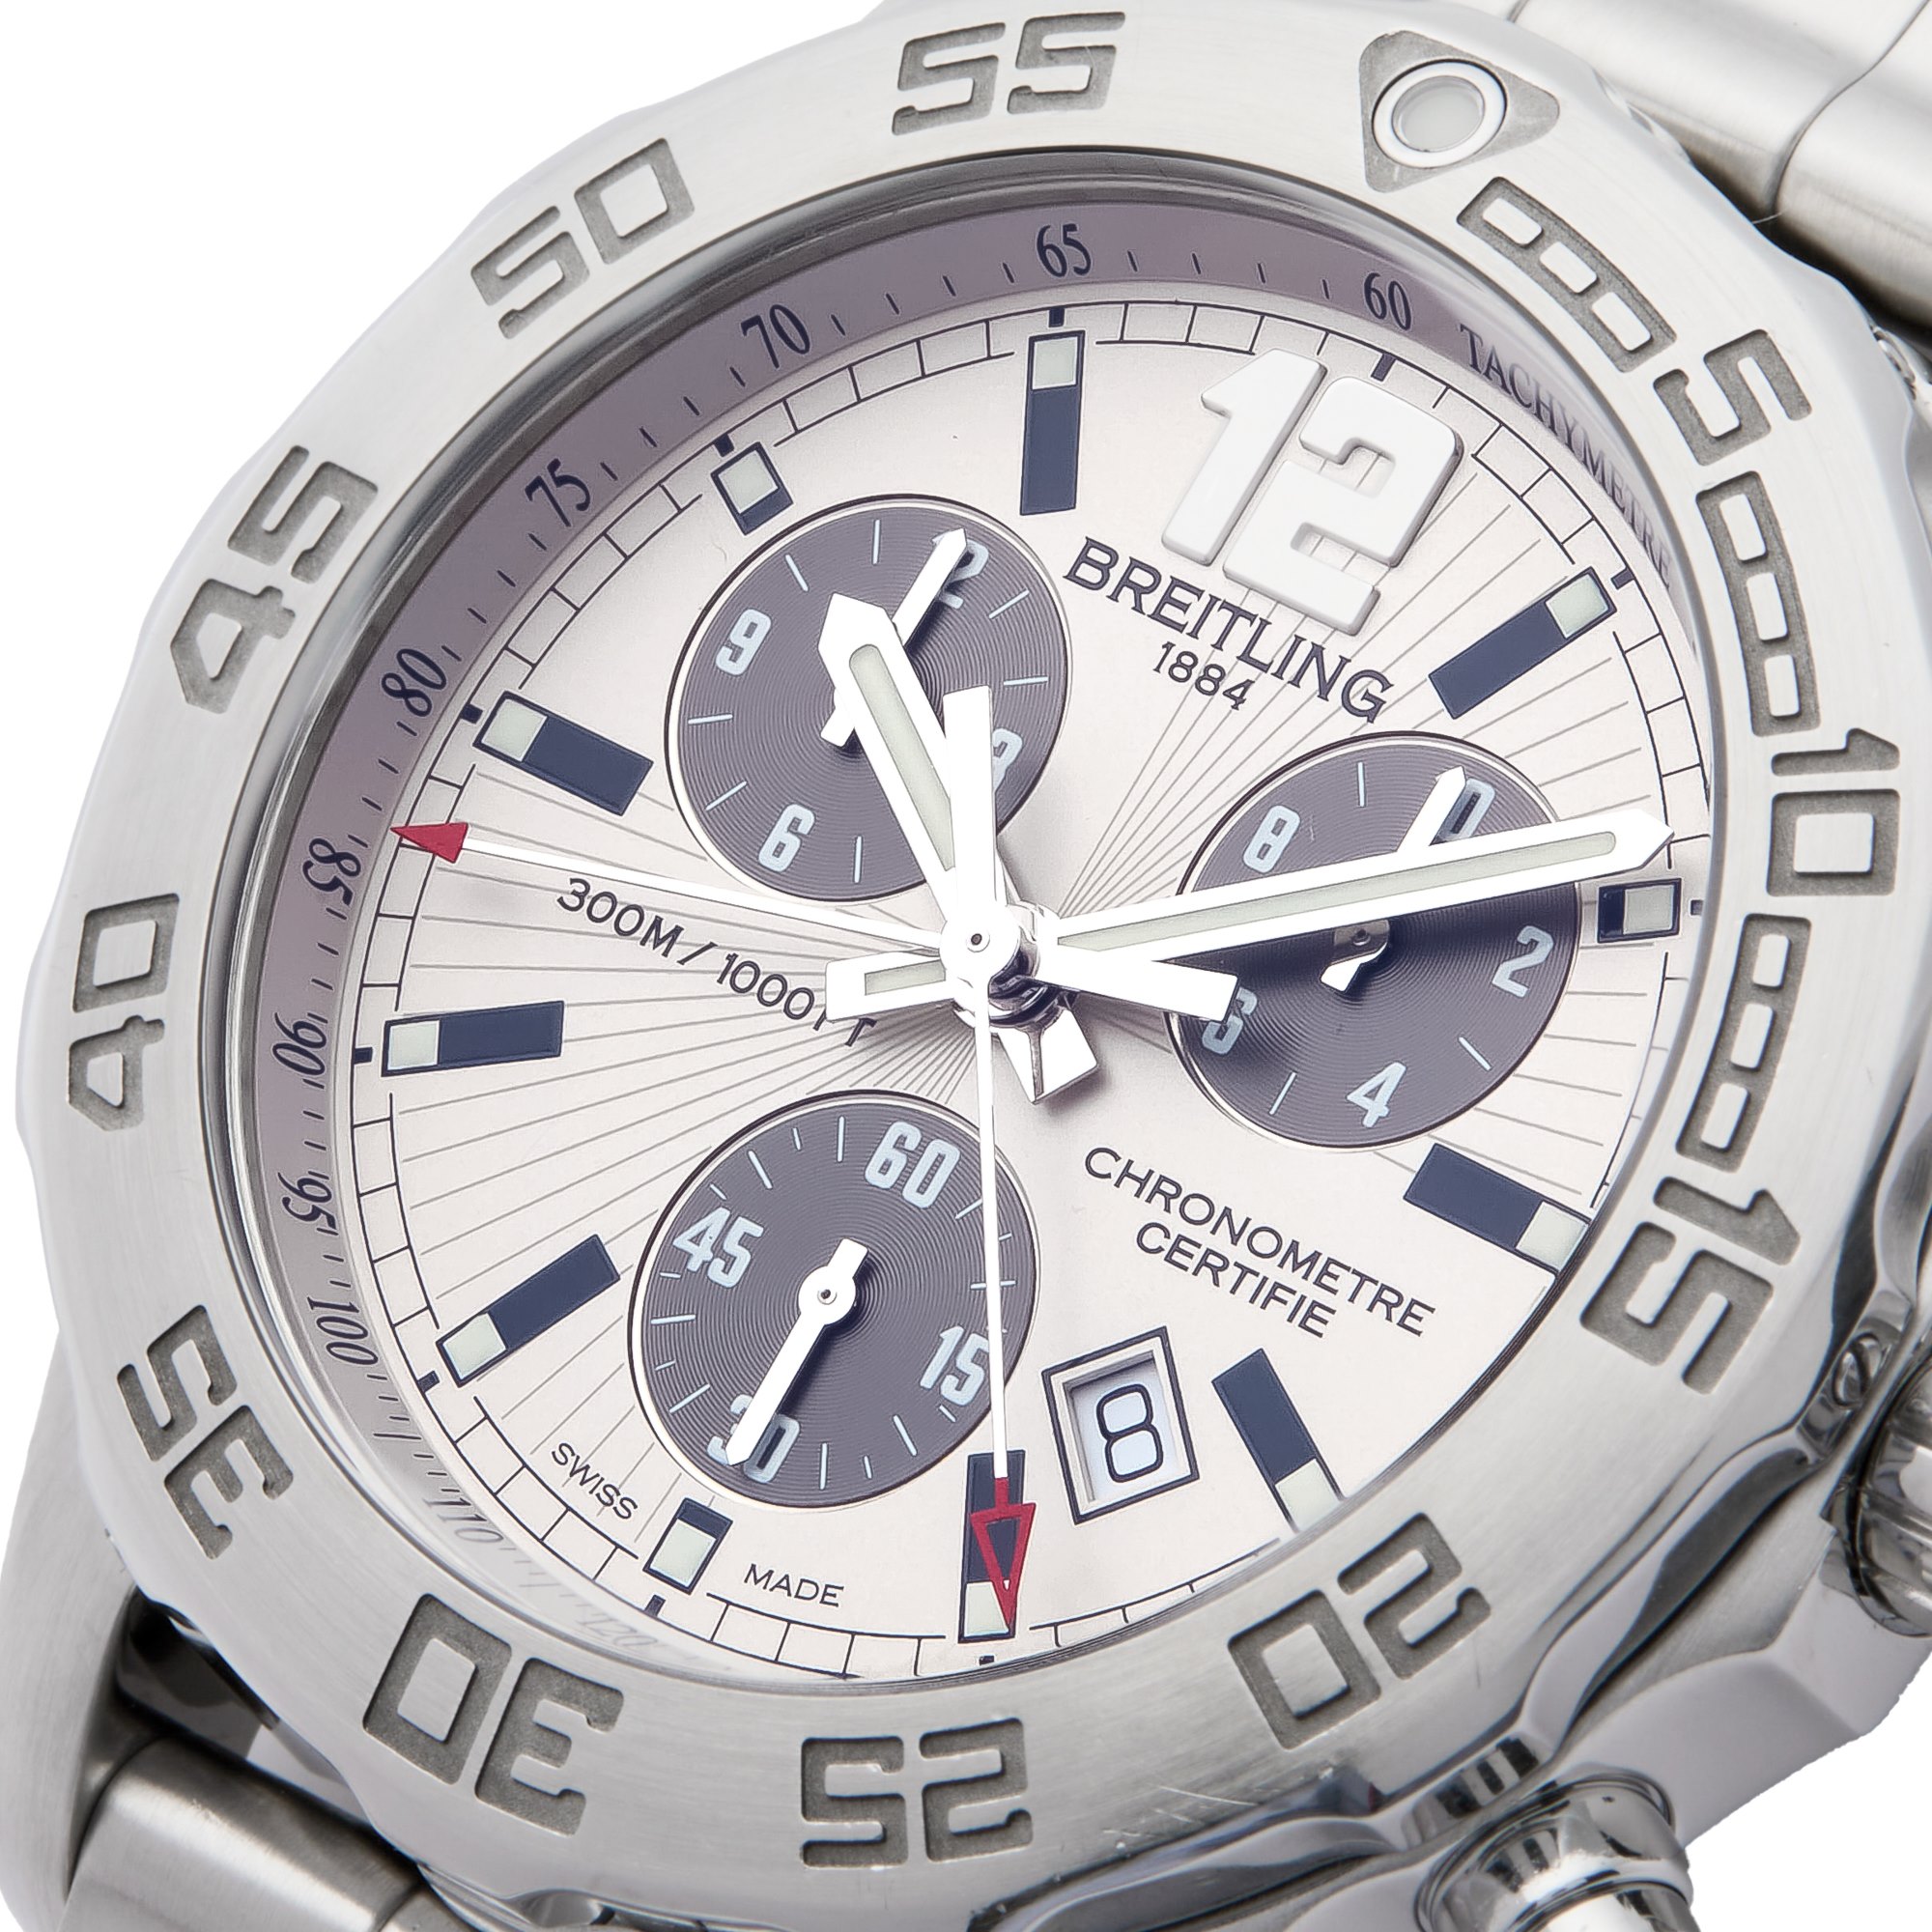 Breitling Colt II Chronograph Stainless Steel A73387